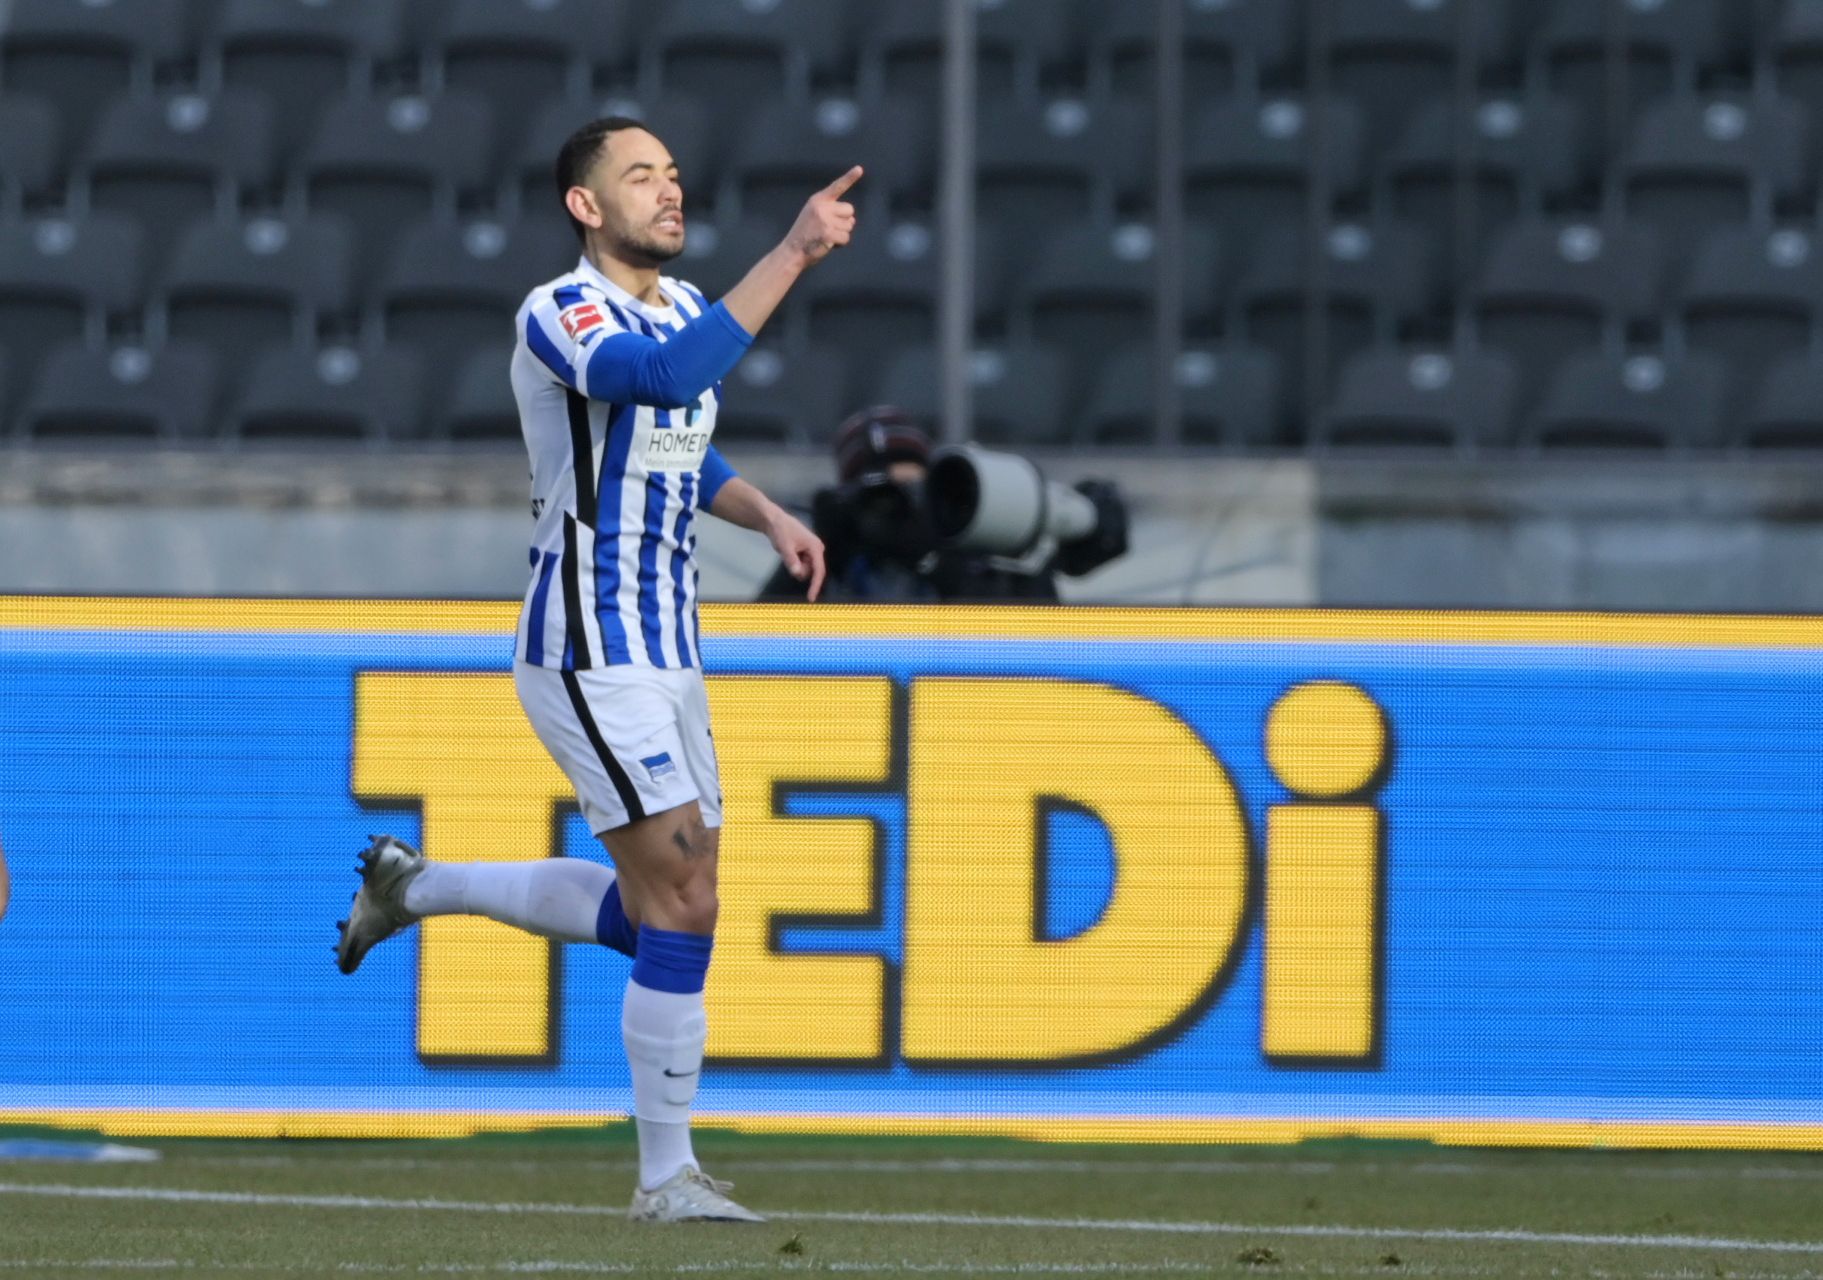 Soccer Football - Bundesliga - Hertha BSC v Bayer Leverkusen - Olympiastadion, Berlin, Germany - March 21, 2021 Hertha BSC's Matheus Cunha celebrates scoring their second goal Pool via REUTERS/Soeren Stache DFL regulations prohibit any use of photographs as image sequences and/or quasi-video.